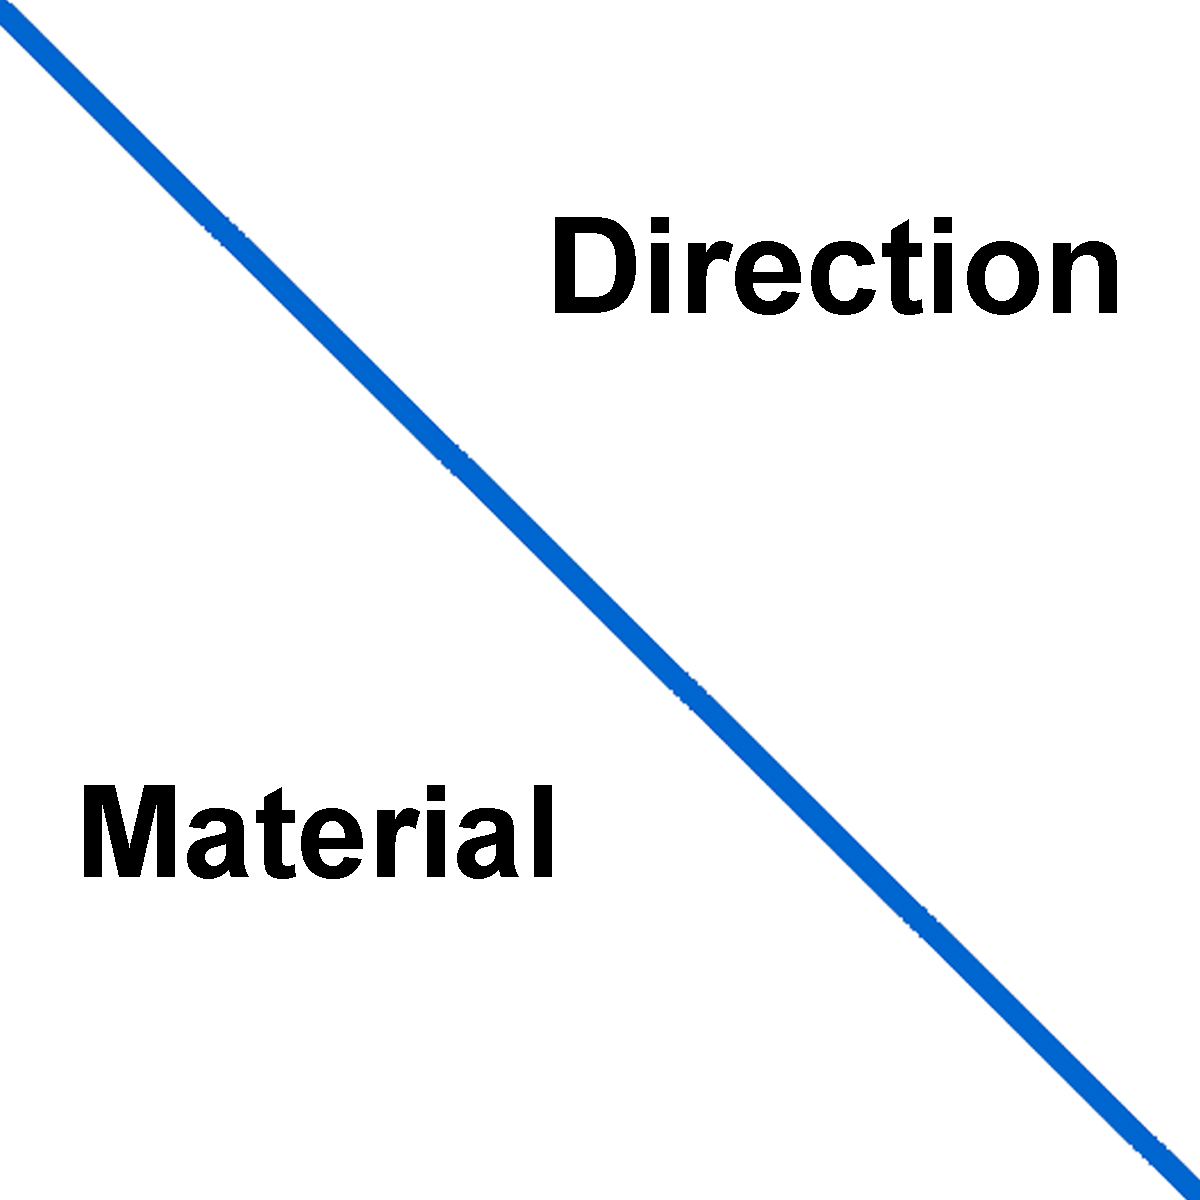 Material and Direction